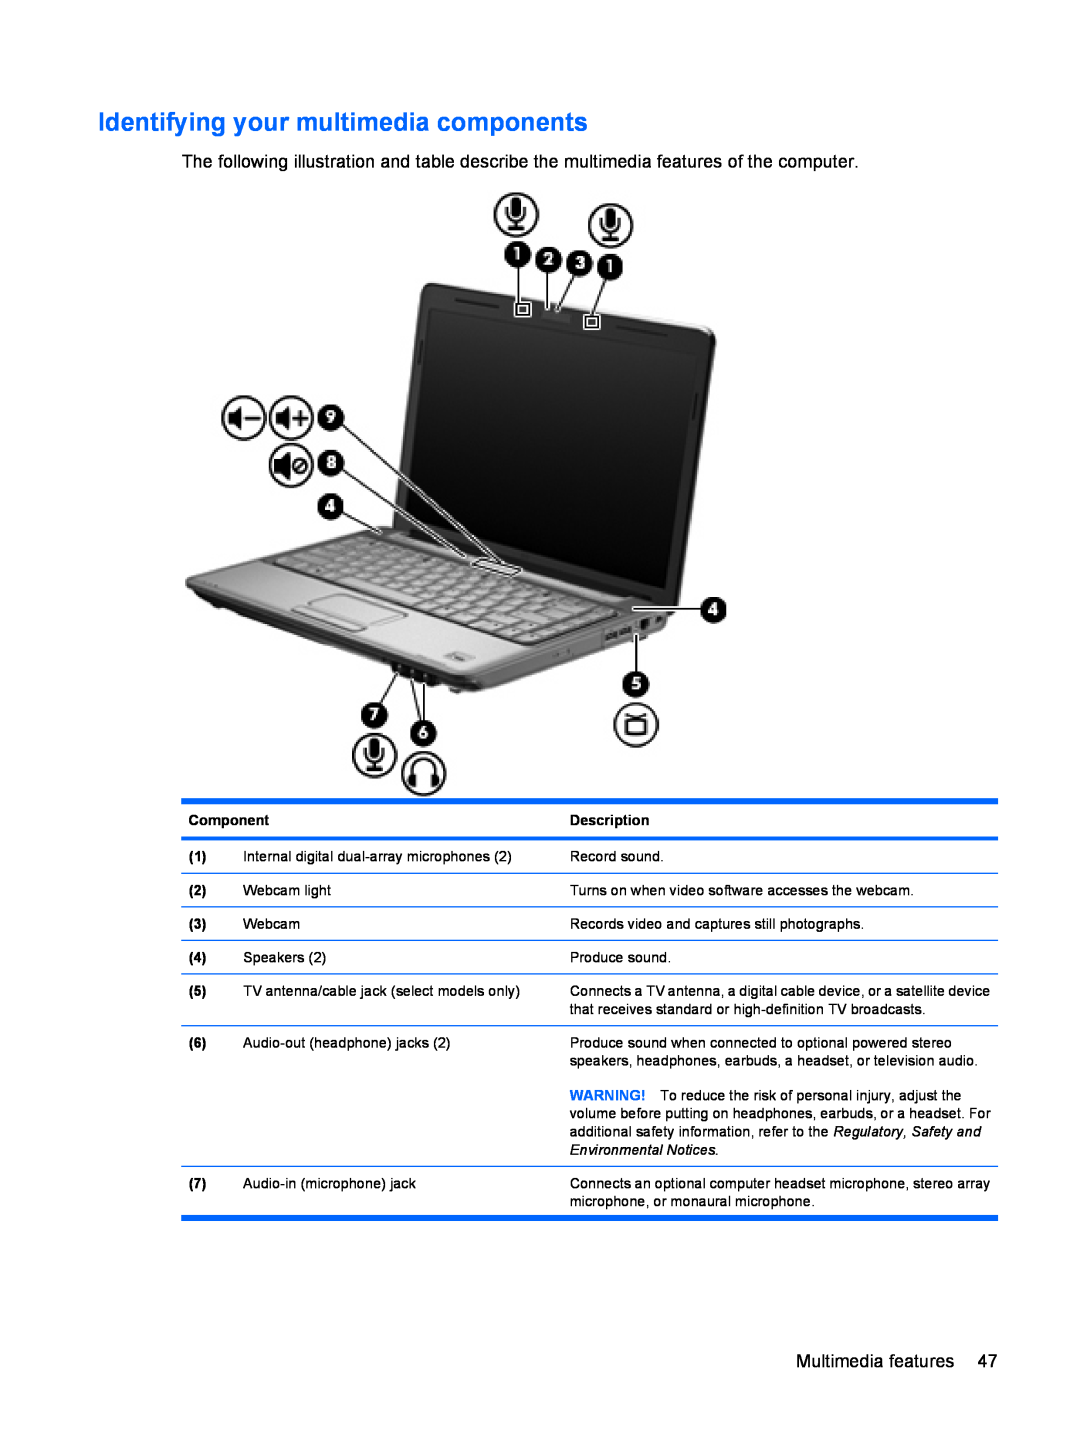 HP dv4-2160us manual Identifying your multimedia components, Component, Description, Environmental Notices 